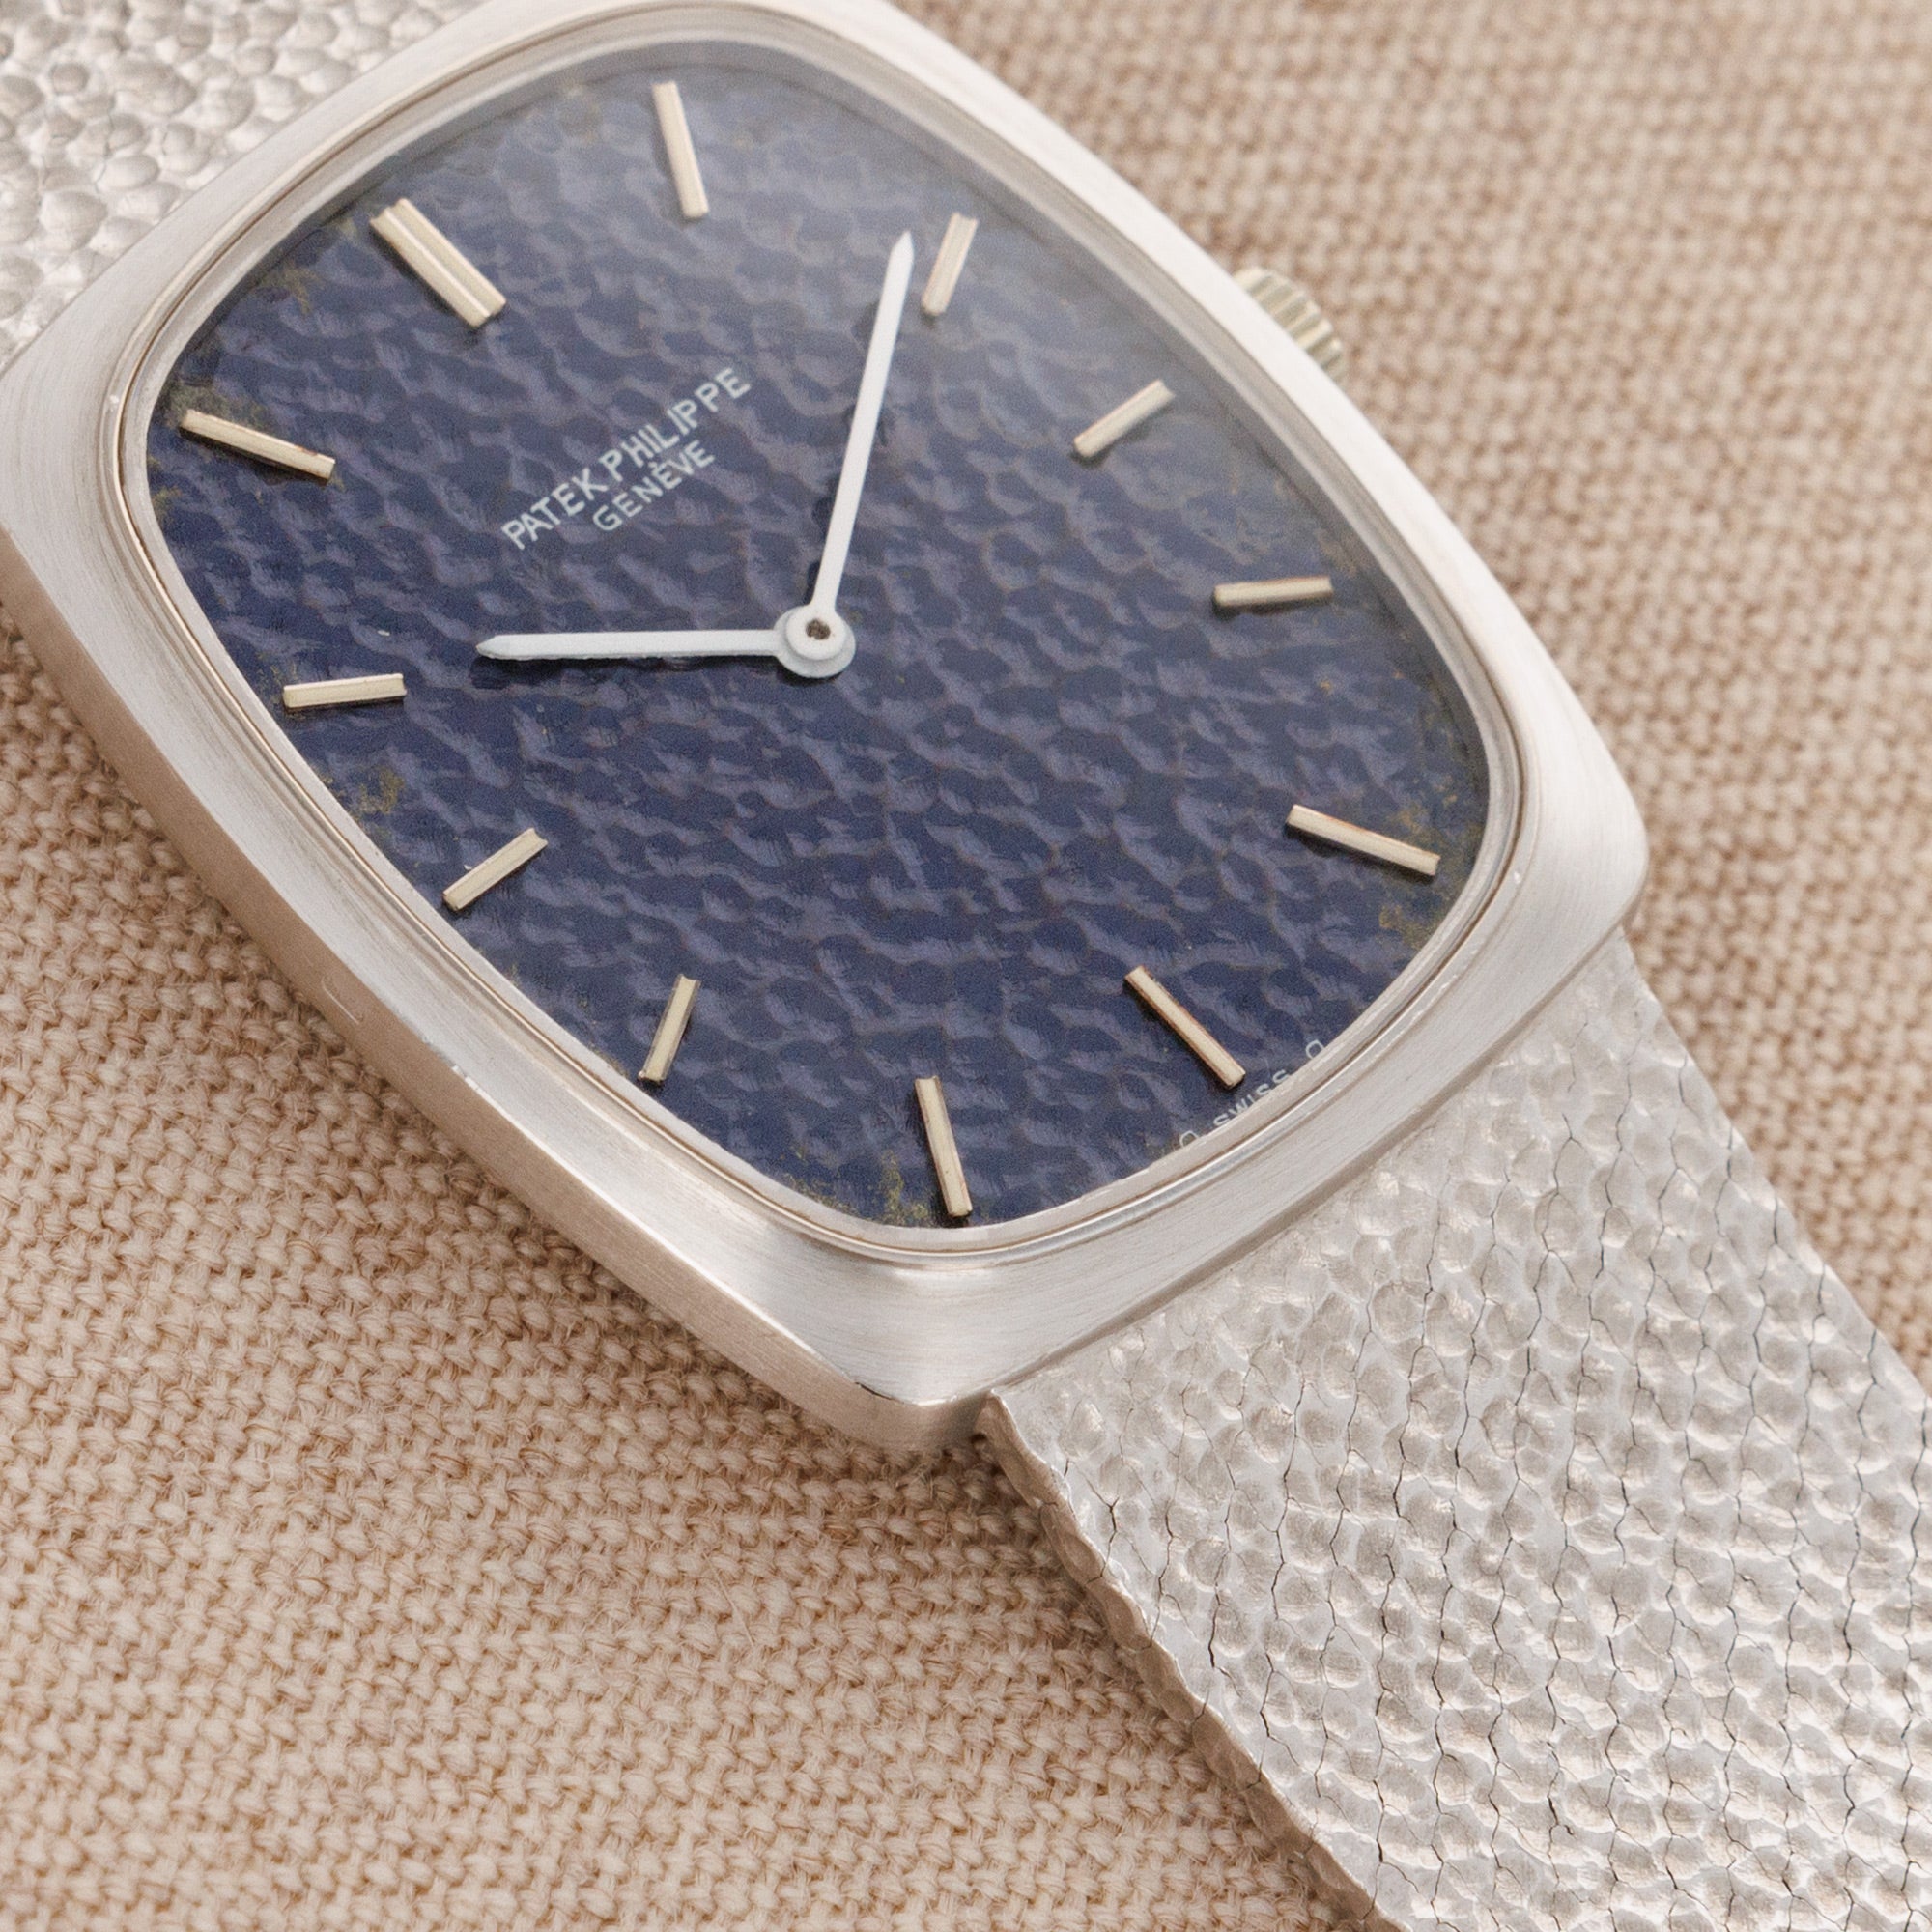 Patek Philippe - Patek Philippe White Gold Mechanical Watch Ref. 3567 with Textured Blue Dial - The Keystone Watches